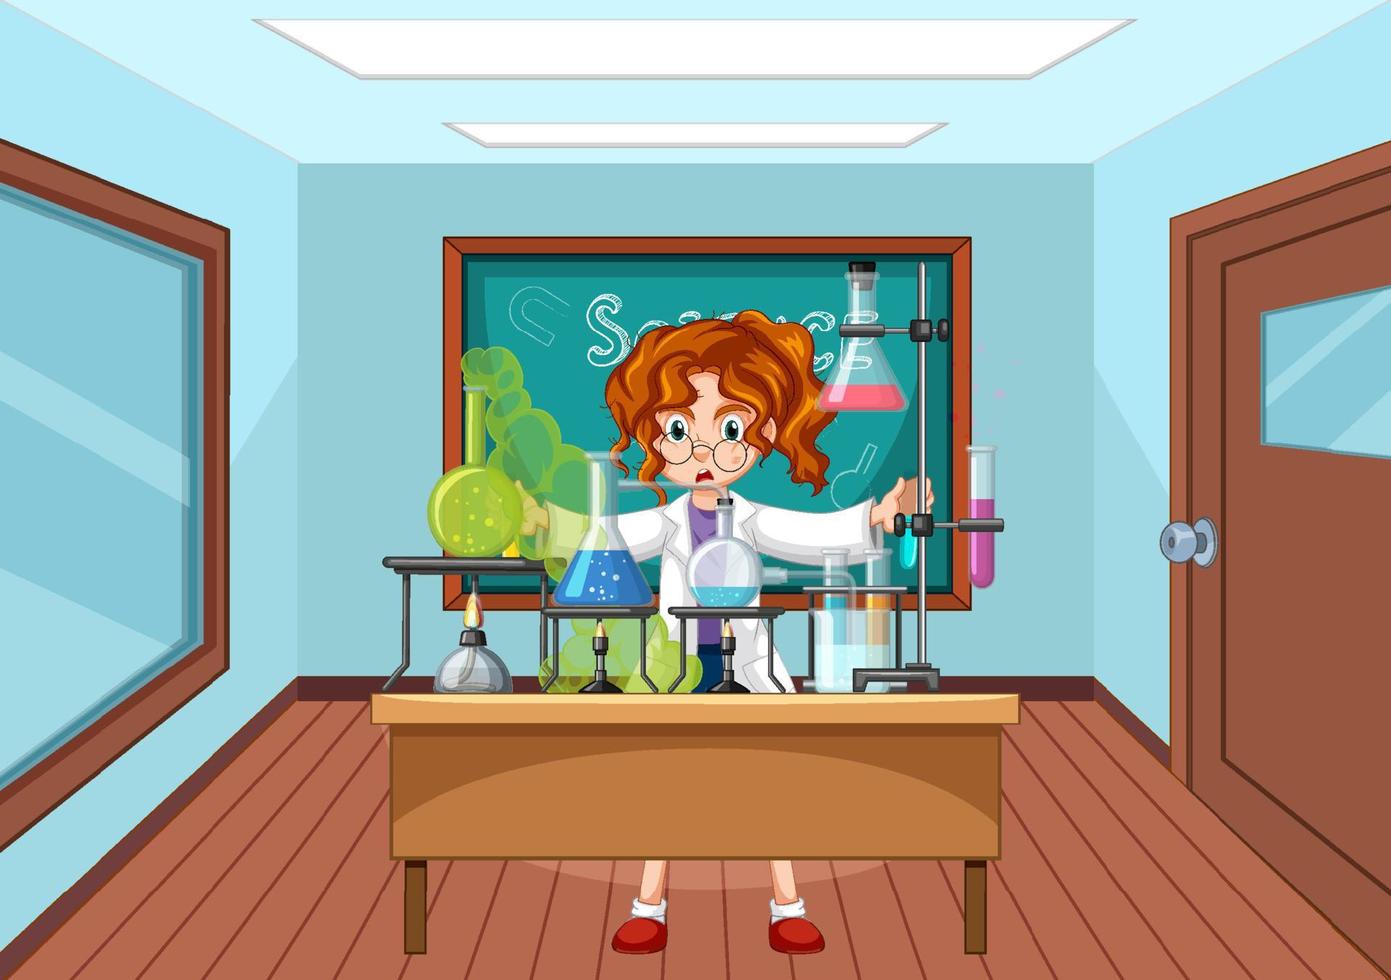 Classroom scene with scientist doing experiment vector